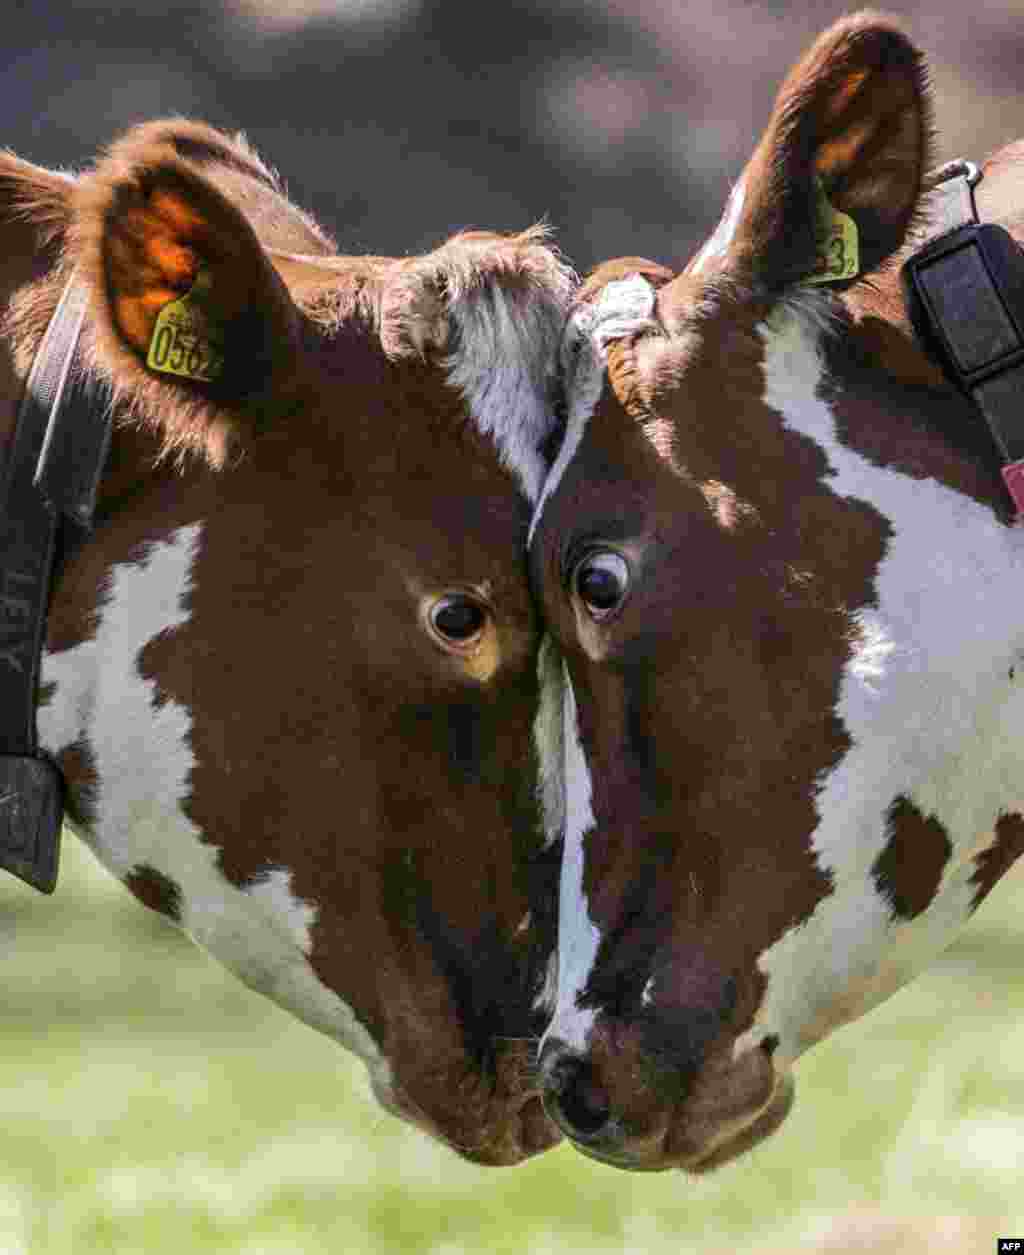 Two cows challenge each other muzzle to muzzle during the traditional spring release of cows in Huddinge, Sweden.